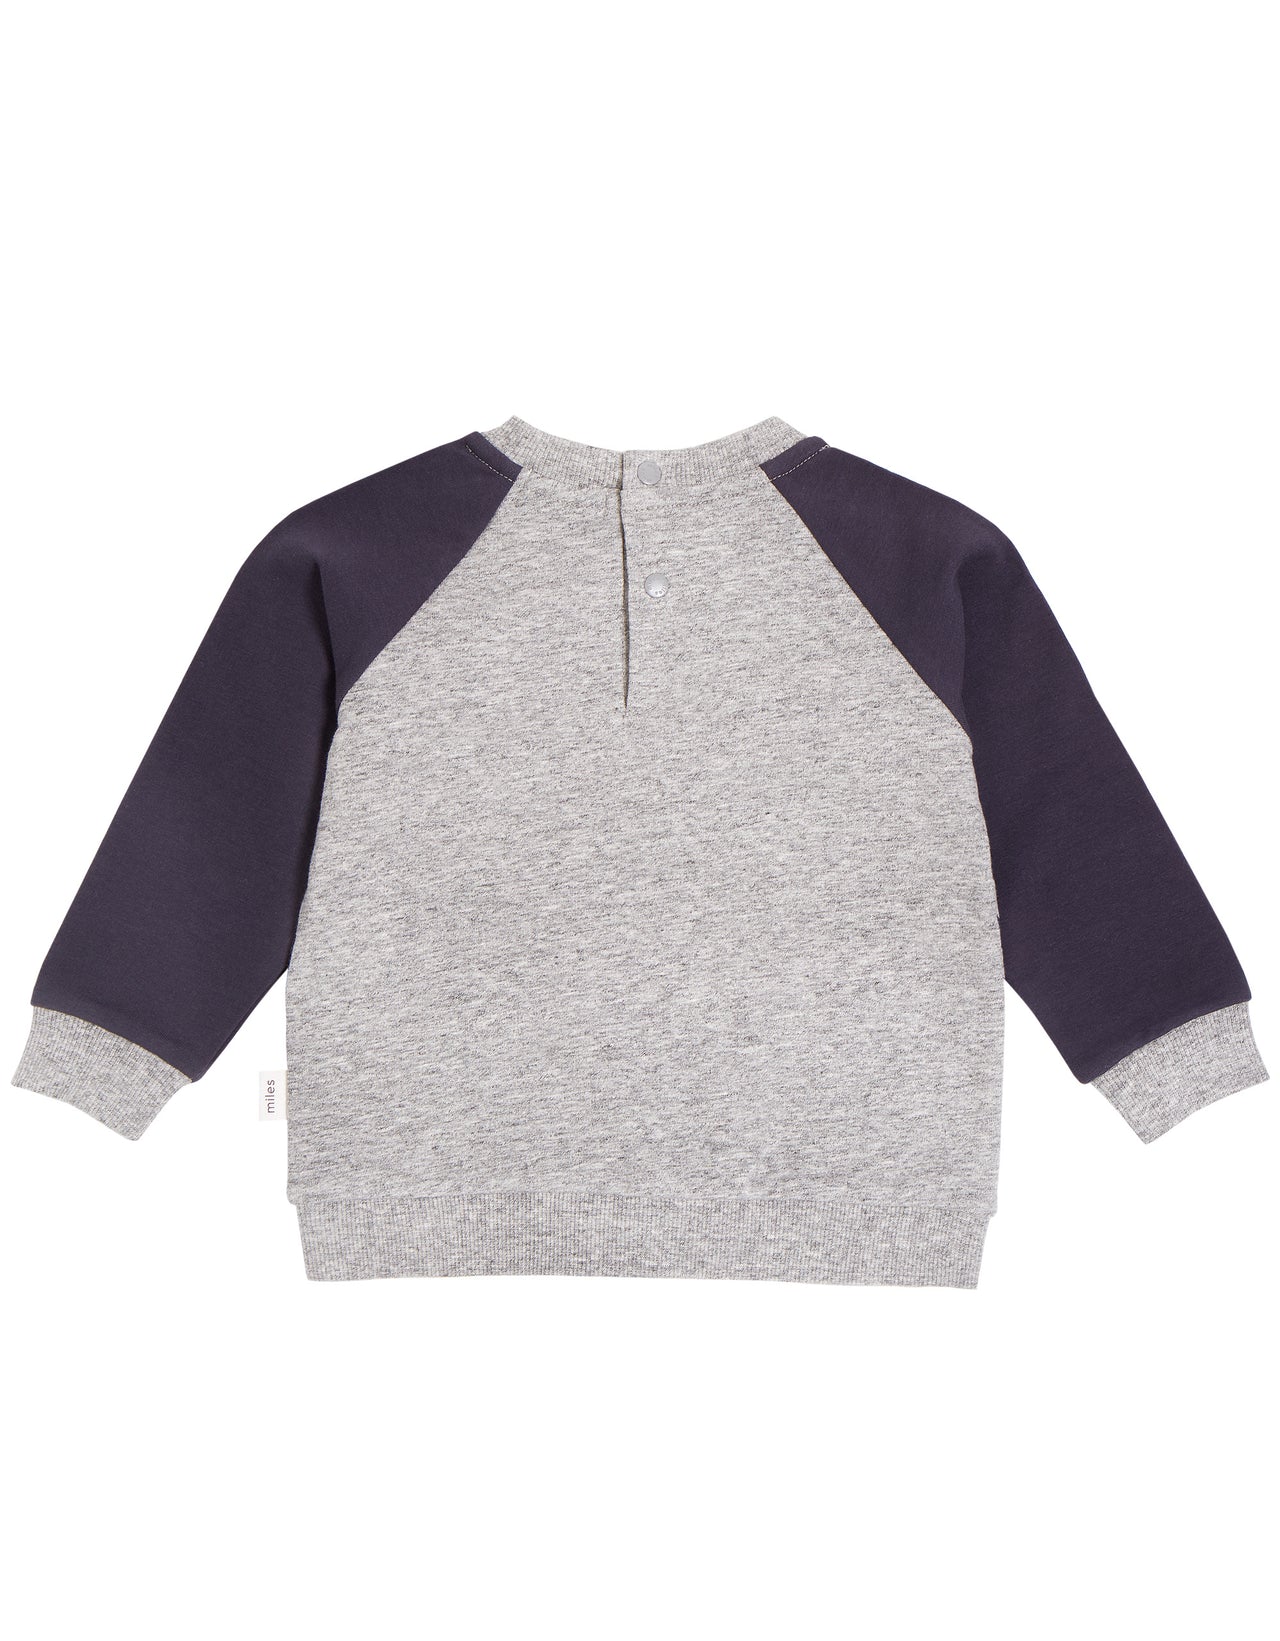 MILES INFANT TRACK SWEATER BABY - HEATHER GREY BLUE